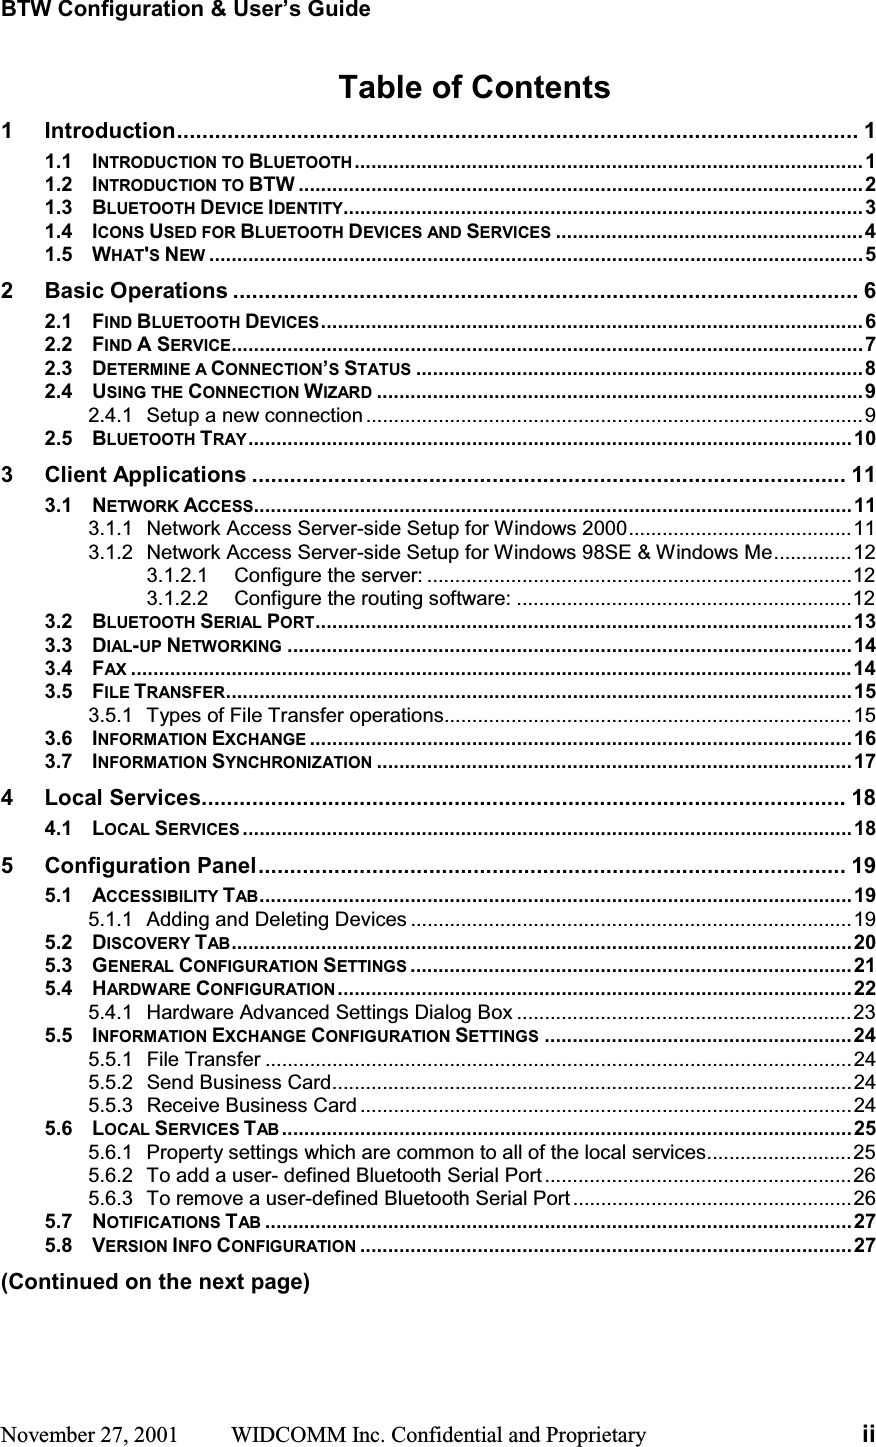 BTW Configuration &amp; User’s Guide November 27, 2001  WIDCOMM Inc. Confidential and Proprietary  iiTable of Contents 1 Introduction............................................................................................................ 11.1 INTRODUCTION TO BLUETOOTH...........................................................................................11.2 INTRODUCTION TO BTW .....................................................................................................21.3 BLUETOOTH DEVICE IDENTITY.............................................................................................31.4 ICONS USED FOR BLUETOOTH DEVICES AND SERVICES .......................................................41.5 WHAT&apos;SNEW .....................................................................................................................52 Basic Operations ................................................................................................... 62.1 FIND BLUETOOTH DEVICES.................................................................................................62.2 FIND A SERVICE.................................................................................................................72.3 DETERMINE A CONNECTION’SSTATUS ................................................................................82.4 USING THE CONNECTION WIZARD .......................................................................................92.4.1 Setup a new connection .........................................................................................92.5 BLUETOOTH TRAY............................................................................................................103 Client Applications .............................................................................................. 113.1 NETWORK ACCESS...........................................................................................................113.1.1 Network Access Server-side Setup for Windows 2000........................................113.1.2 Network Access Server-side Setup for Windows 98SE &amp; Windows Me..............123.1.2.1 Configure the server: ............................................................................123.1.2.2 Configure the routing software: ............................................................123.2 BLUETOOTH SERIAL PORT................................................................................................133.3 DIAL-UP NETWORKING .....................................................................................................143.4 FAX .................................................................................................................................143.5 FILE TRANSFER................................................................................................................153.5.1 Types of File Transfer operations.........................................................................153.6 INFORMATION EXCHANGE .................................................................................................163.7 INFORMATION SYNCHRONIZATION .....................................................................................174 Local Services...................................................................................................... 184.1 LOCAL SERVICES .............................................................................................................185 Configuration Panel............................................................................................. 195.1 ACCESSIBILITY TAB..........................................................................................................195.1.1 Adding and Deleting Devices ...............................................................................195.2 DISCOVERY TAB...............................................................................................................205.3 GENERAL CONFIGURATION SETTINGS ...............................................................................215.4 HARDWARE CONFIGURATION ............................................................................................225.4.1 Hardware Advanced Settings Dialog Box ............................................................235.5 INFORMATION EXCHANGE CONFIGURATION SETTINGS .......................................................245.5.1 File Transfer .........................................................................................................245.5.2 Send Business Card.............................................................................................245.5.3 Receive Business Card ........................................................................................245.6 LOCAL SERVICES TAB ......................................................................................................255.6.1 Property settings which are common to all of the local services..........................255.6.2 To add a user- defined Bluetooth Serial Port .......................................................265.6.3 To remove a user-defined Bluetooth Serial Port ..................................................265.7 NOTIFICATIONS TAB .........................................................................................................275.8 VERSION INFO CONFIGURATION ........................................................................................27(Continued on the next page) 